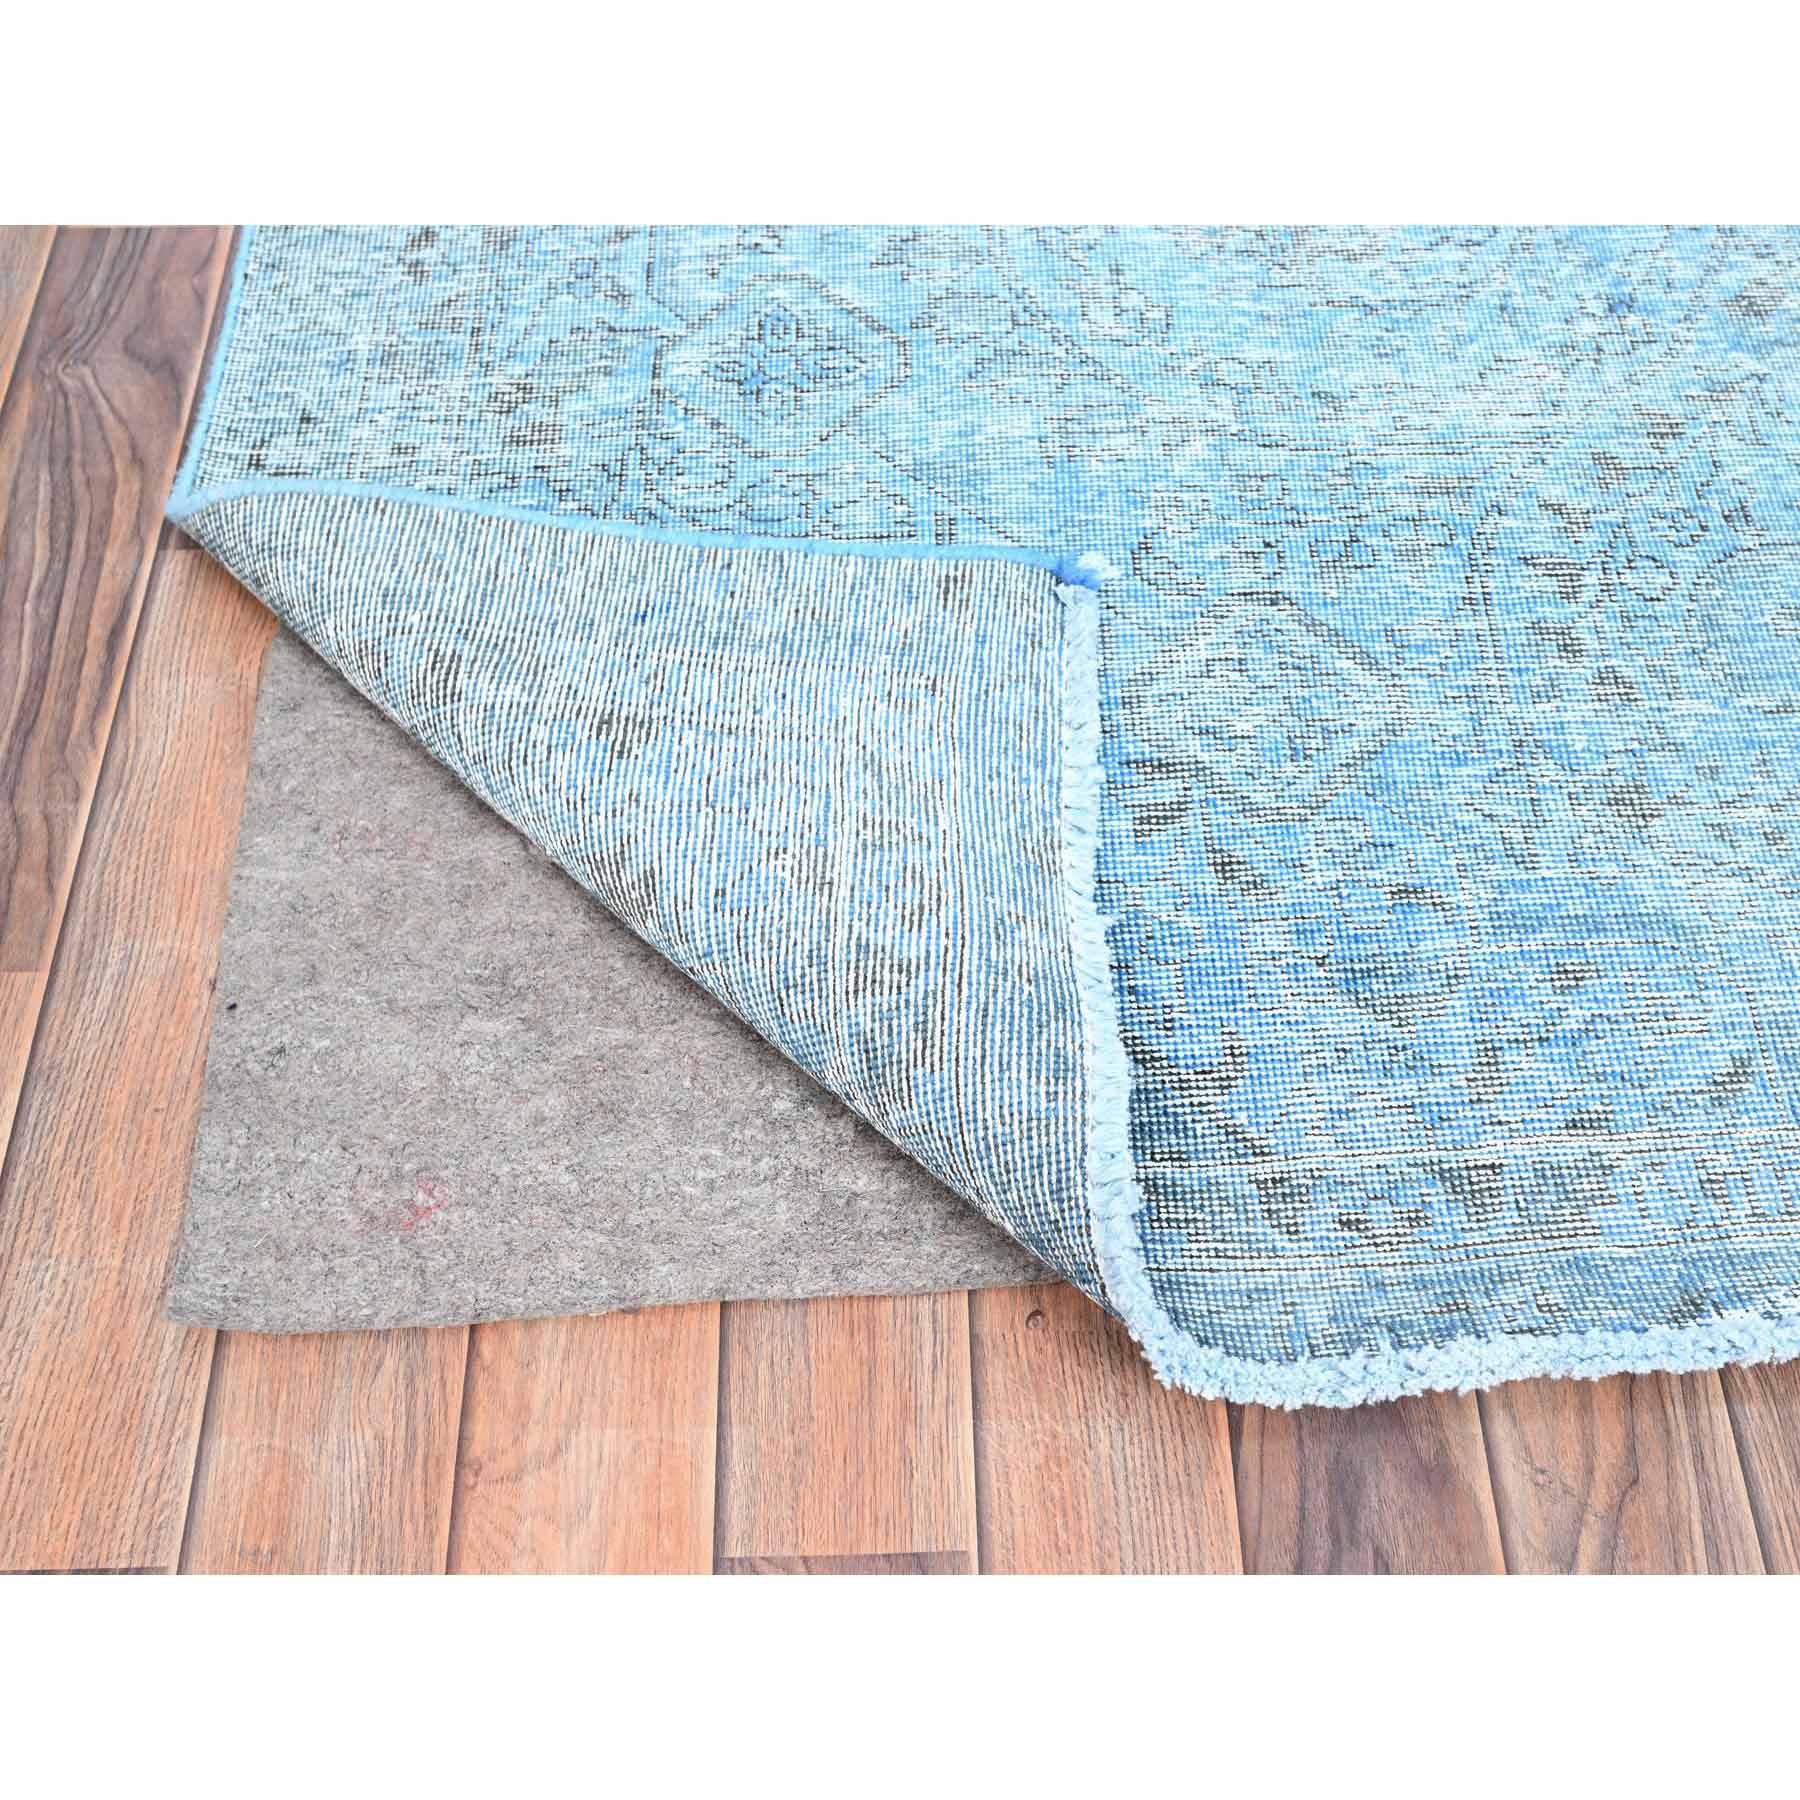 Overdyed-Vintage-Hand-Woven-Rug-427000